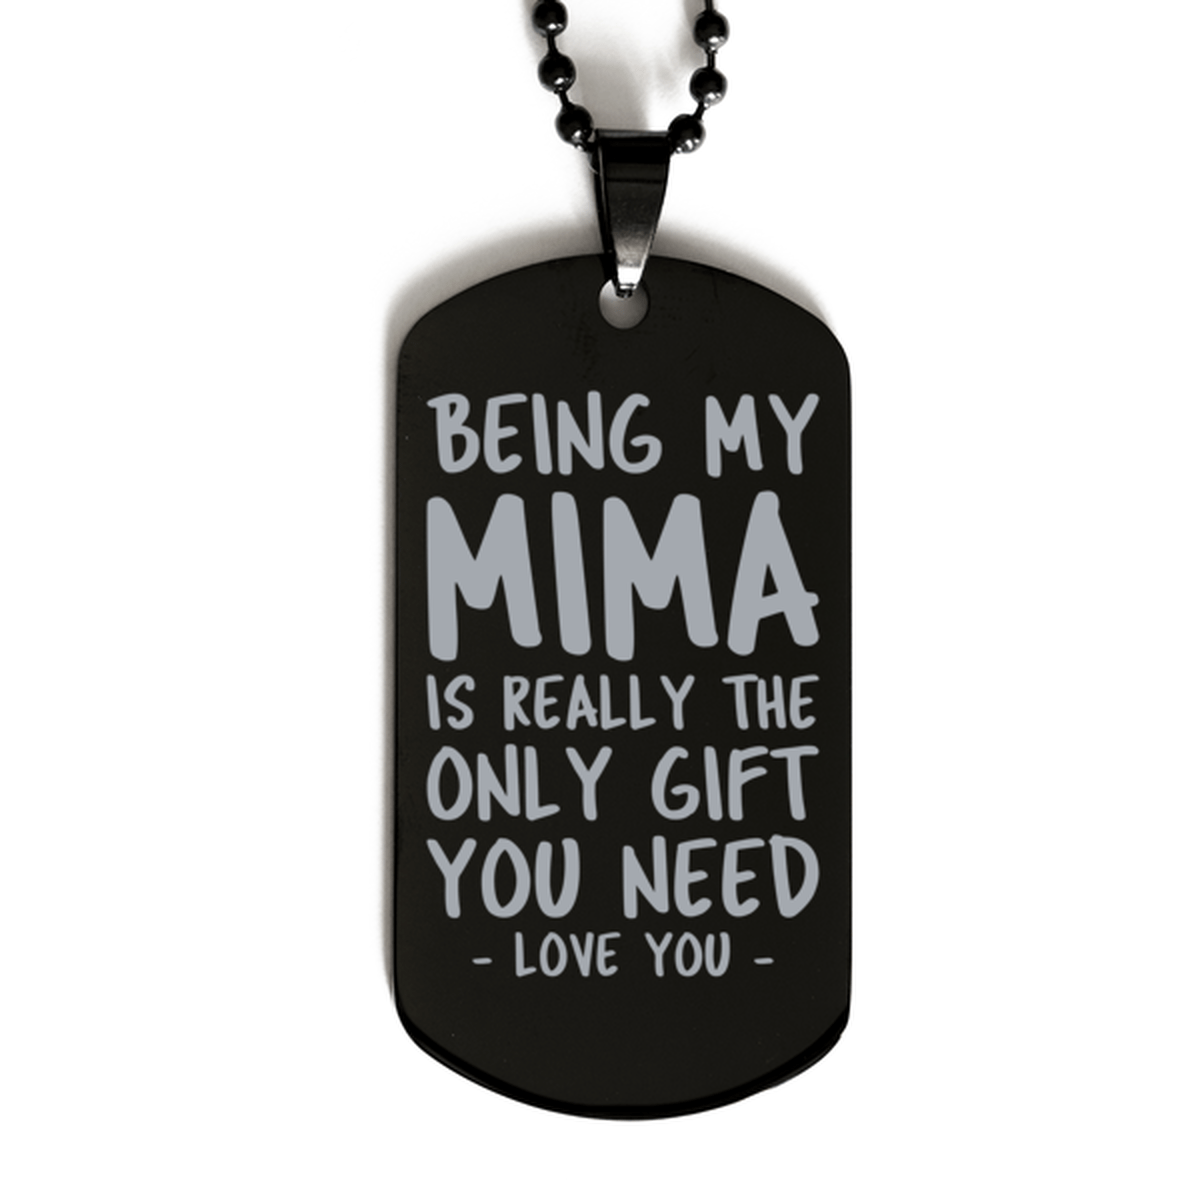 Funny Mima Black Dog Tag Necklace, Being My Mima Is Really the Only Gift You Need, Best Birthday Gifts for Mima